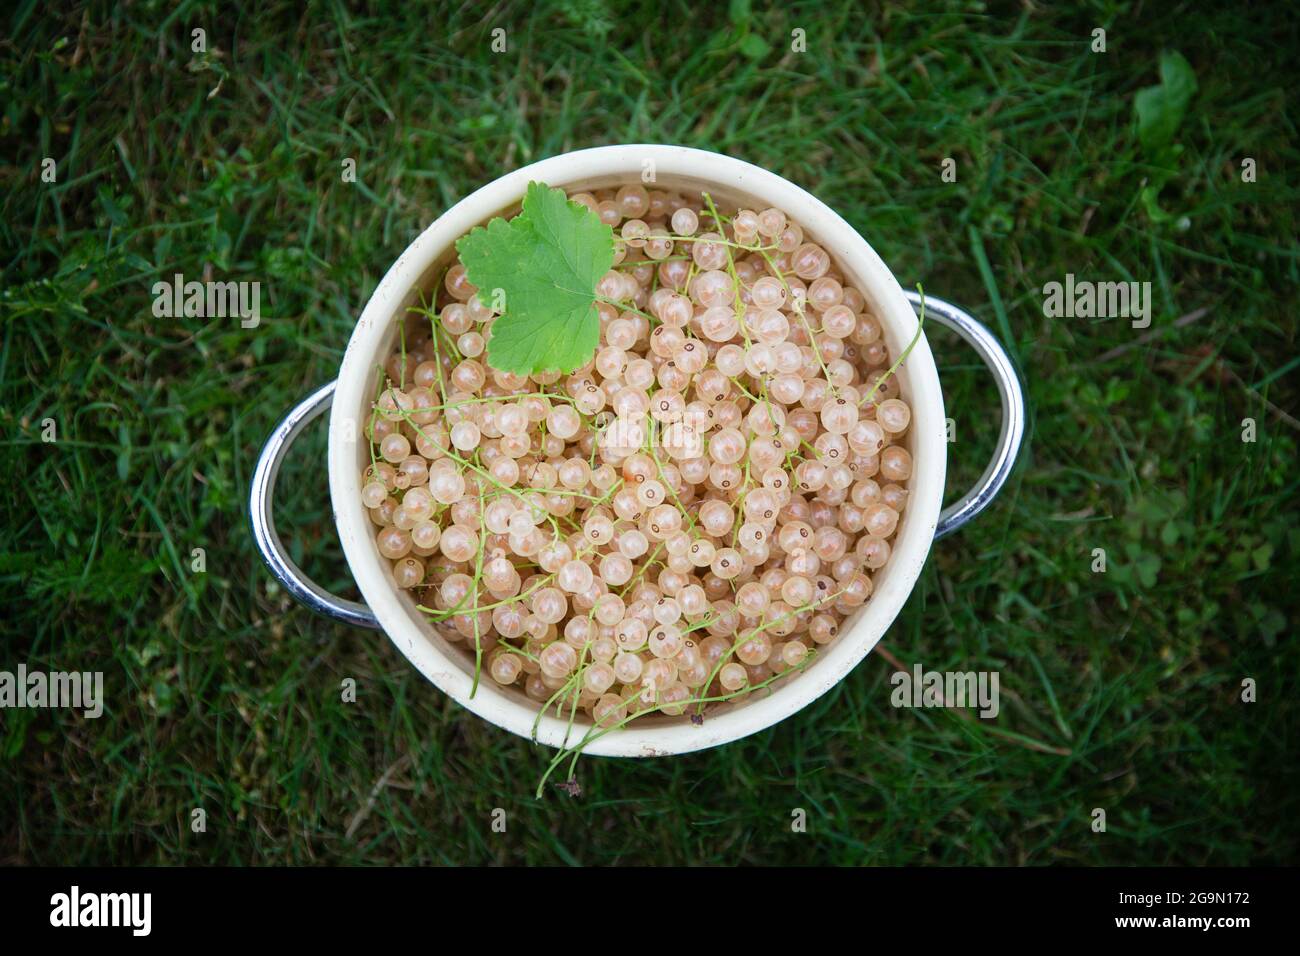 Bowl of white currants on the green grass background. Top view. Stock Photo